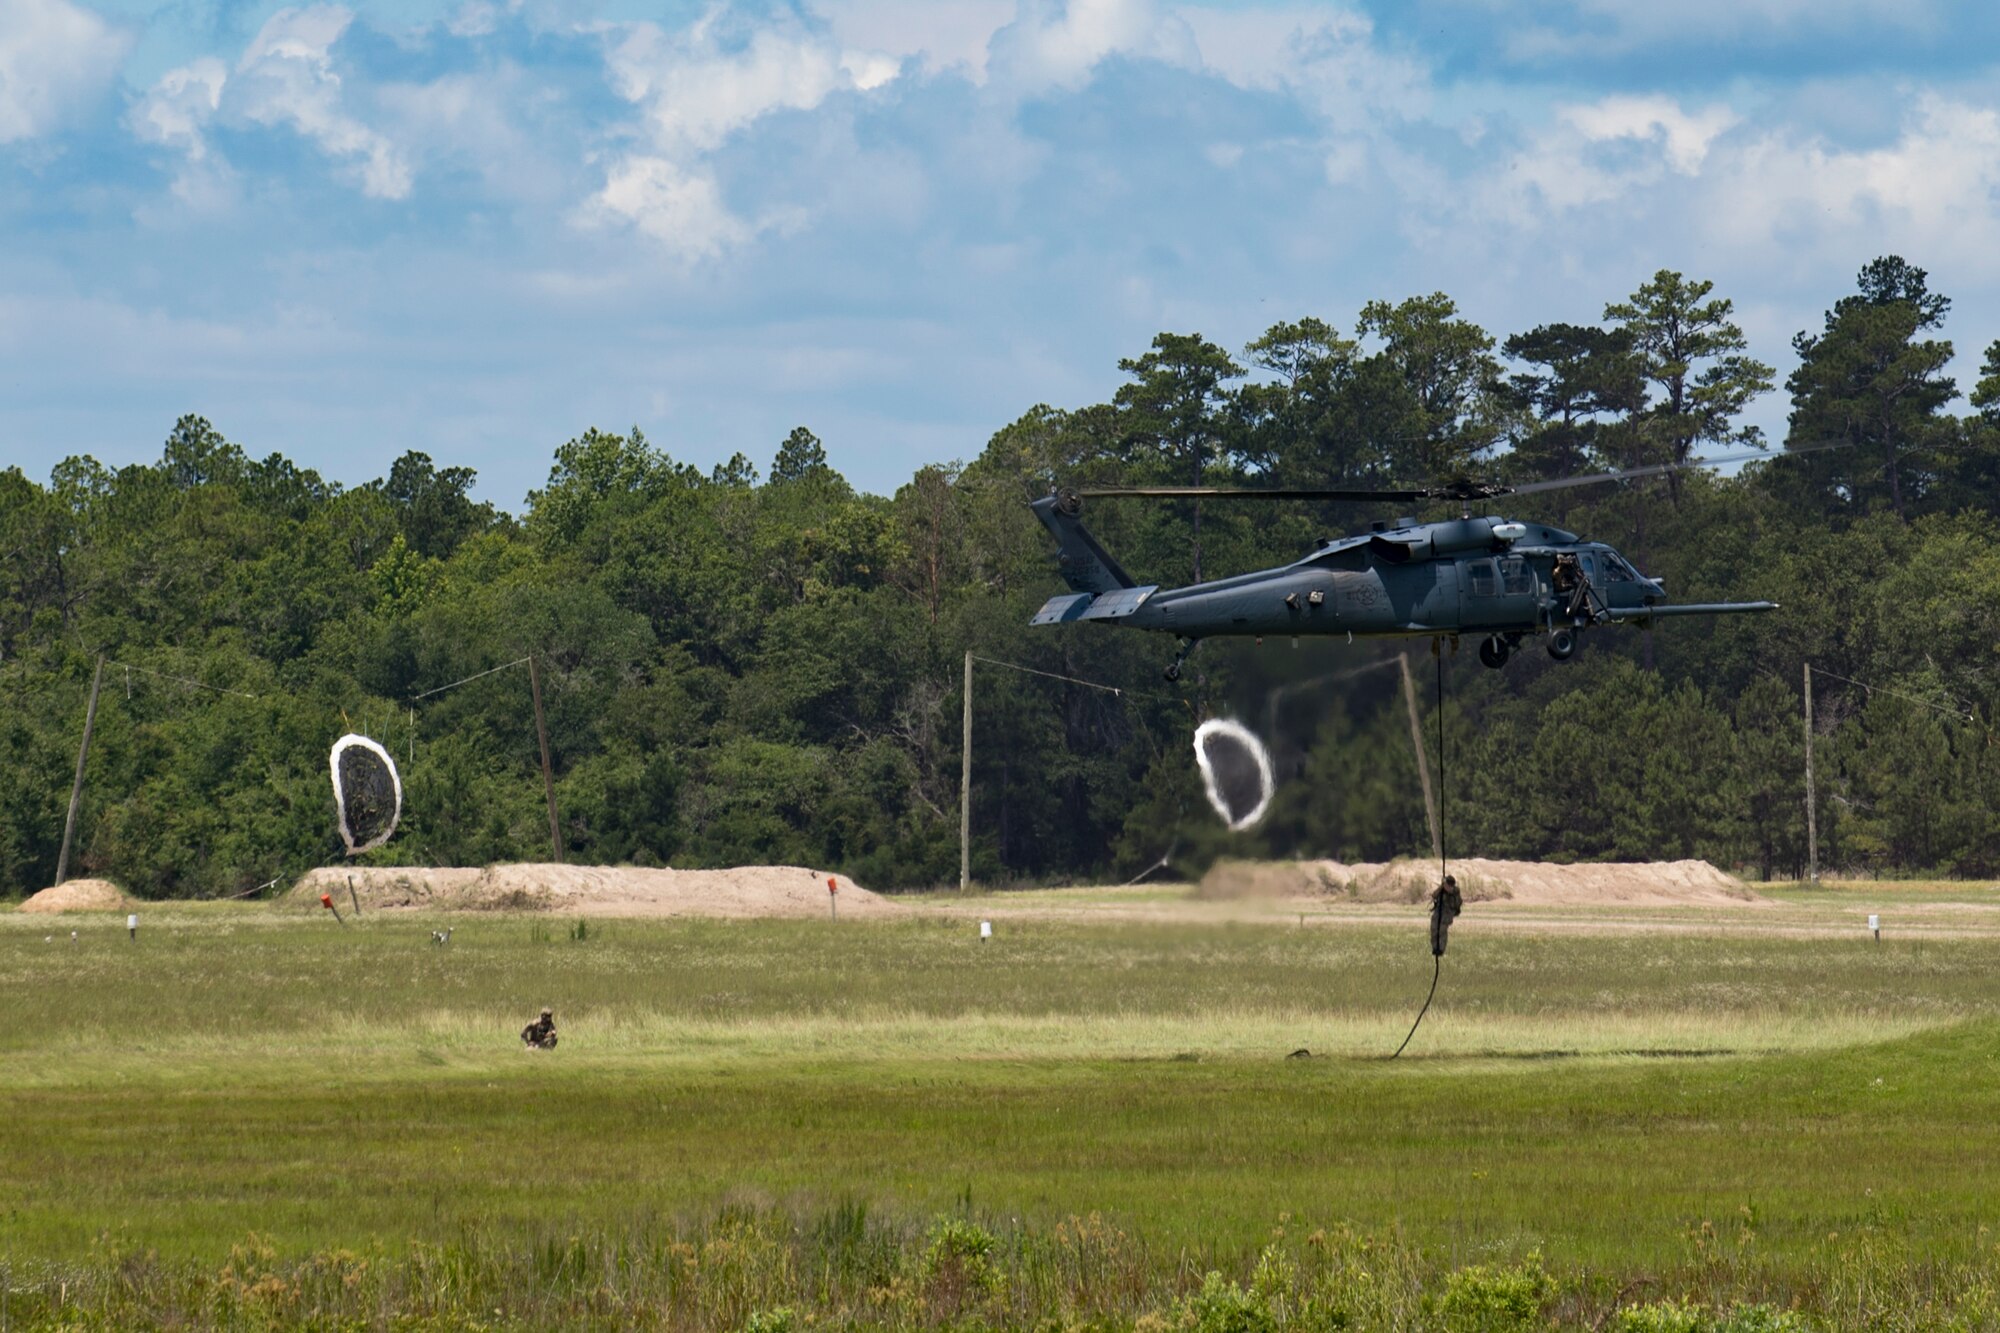 Airmen from the 347th Rescue Group display personnel rescue capabilities during the Joint Civilian Orientation Course 88 (JCOC), June 13, 2018, at Grand Bay Bombing and Gunnery range on Moody Air Force Base, Ga. The mission of JCOC is to increase the public’s understanding of the military through engagements between the armed forces and course members. (U.S. Air Force photo by Senior Airman Daniel Snider)